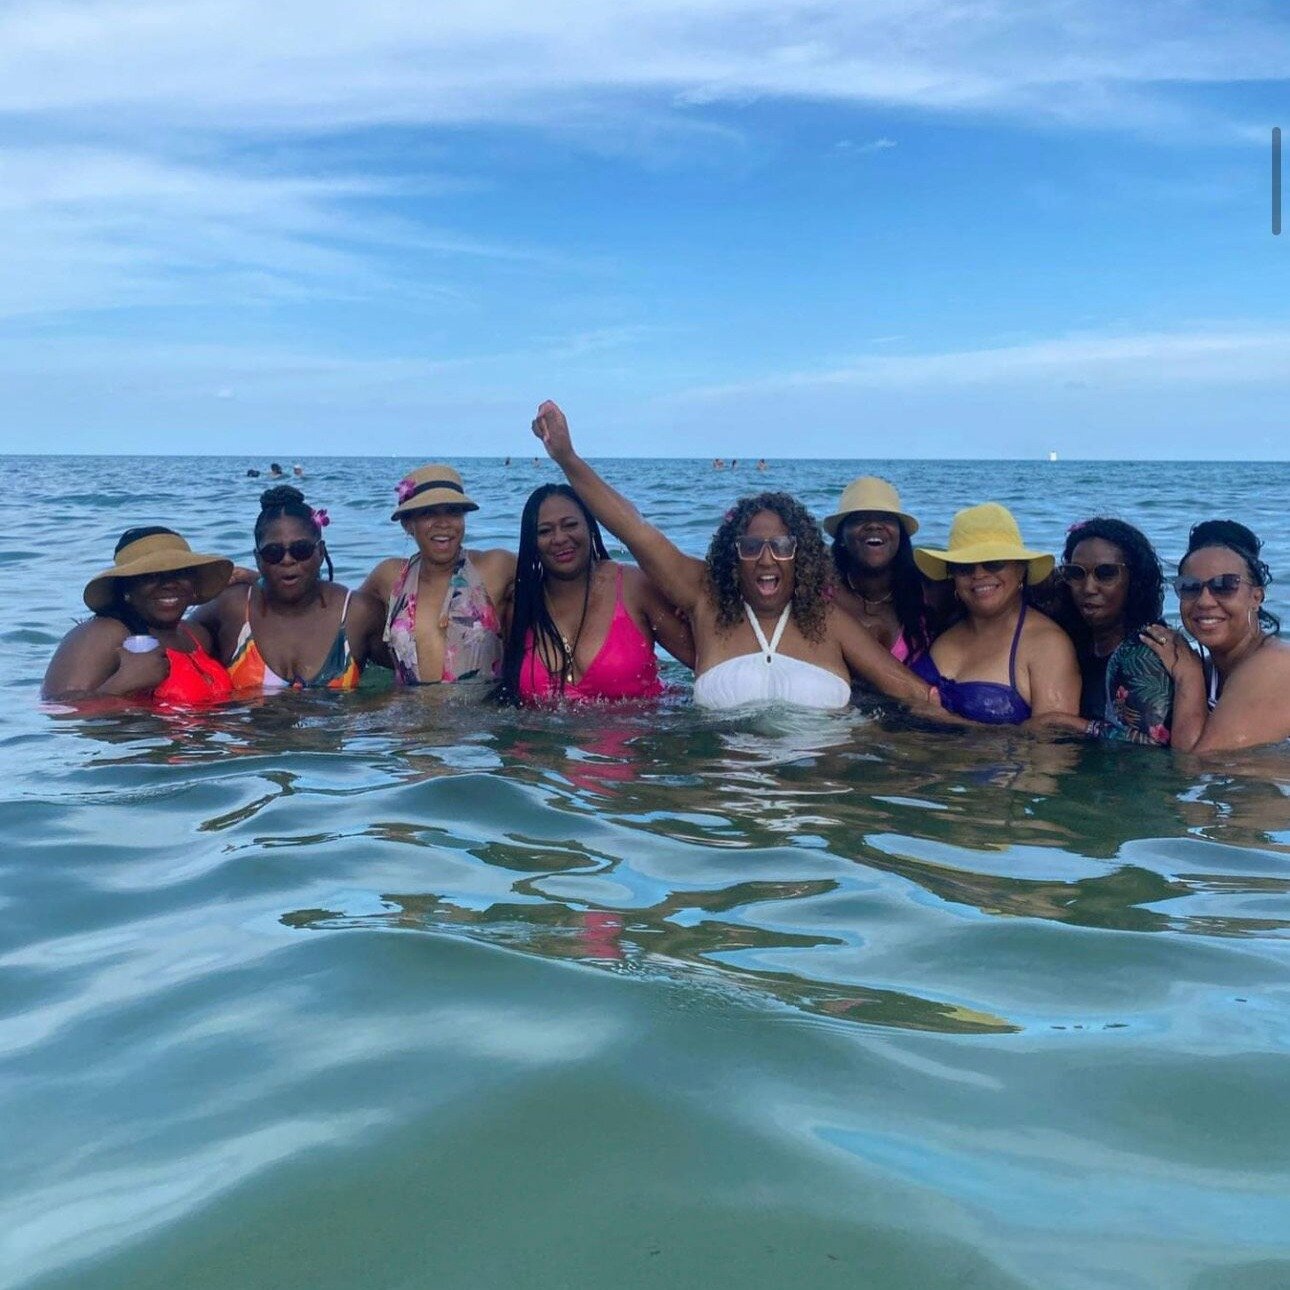 🎉 Cheers to 50 and Fabulous in Miami! 🌴 these ladies lived it up celebrating my clients 50th birthday, indulging in amazing food and dancing the night away in the vibrant city of Miami. 🍹🍽️💃

From savoring mouthwatering delights to moving to the